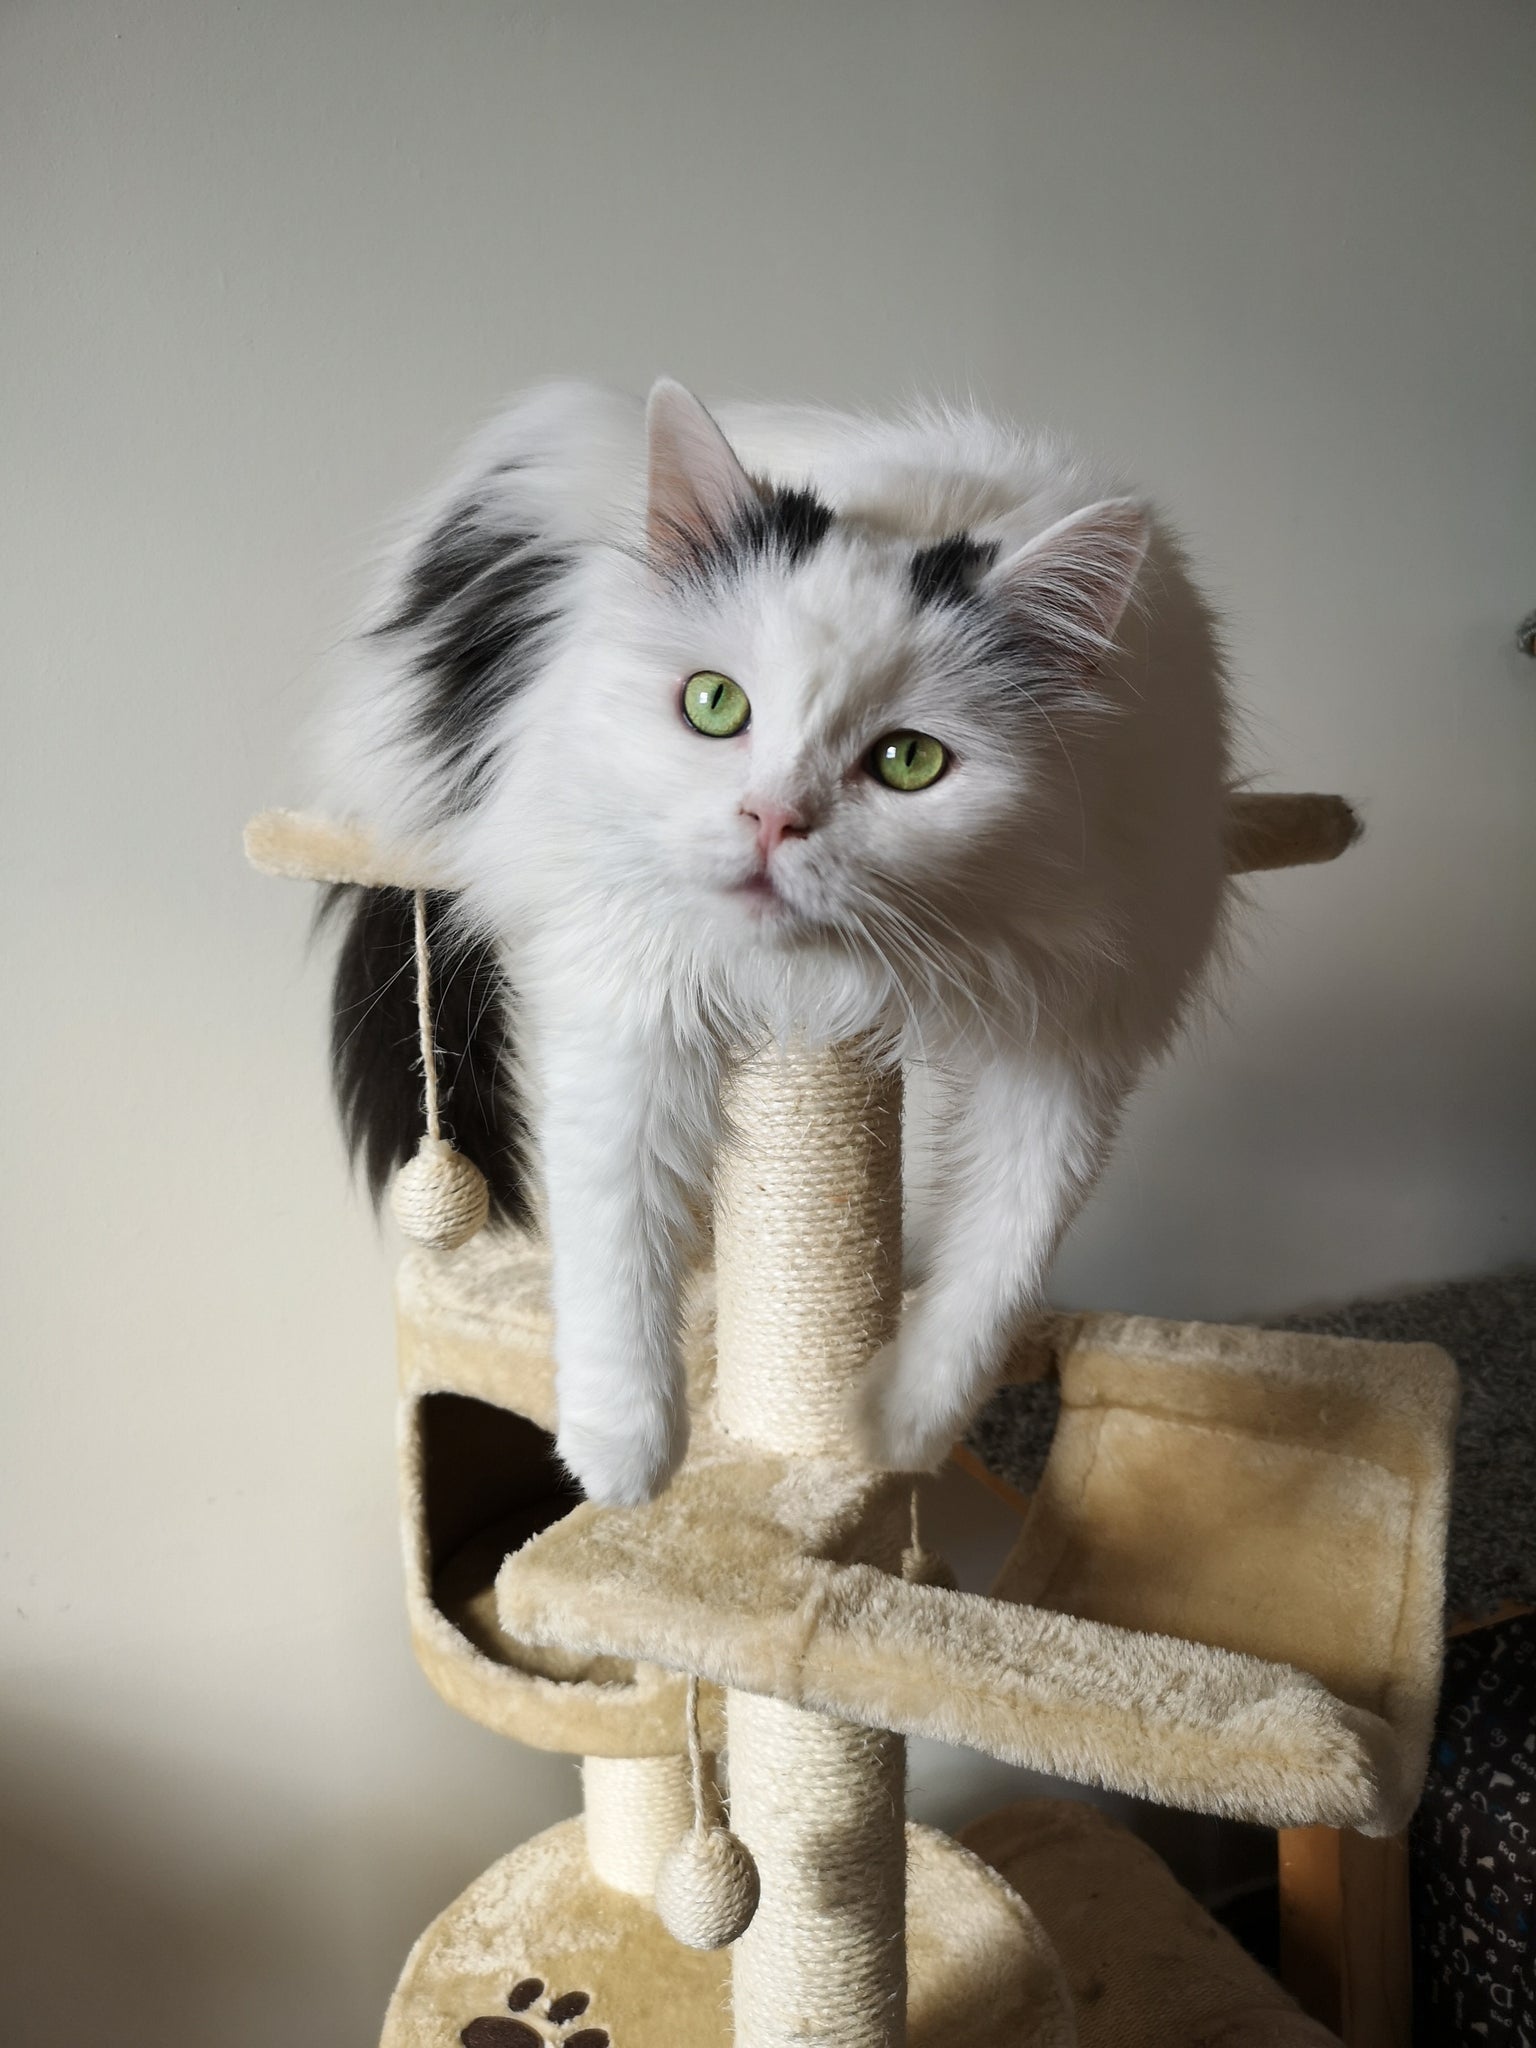 Find the best cat scratcher - Comparison of available models